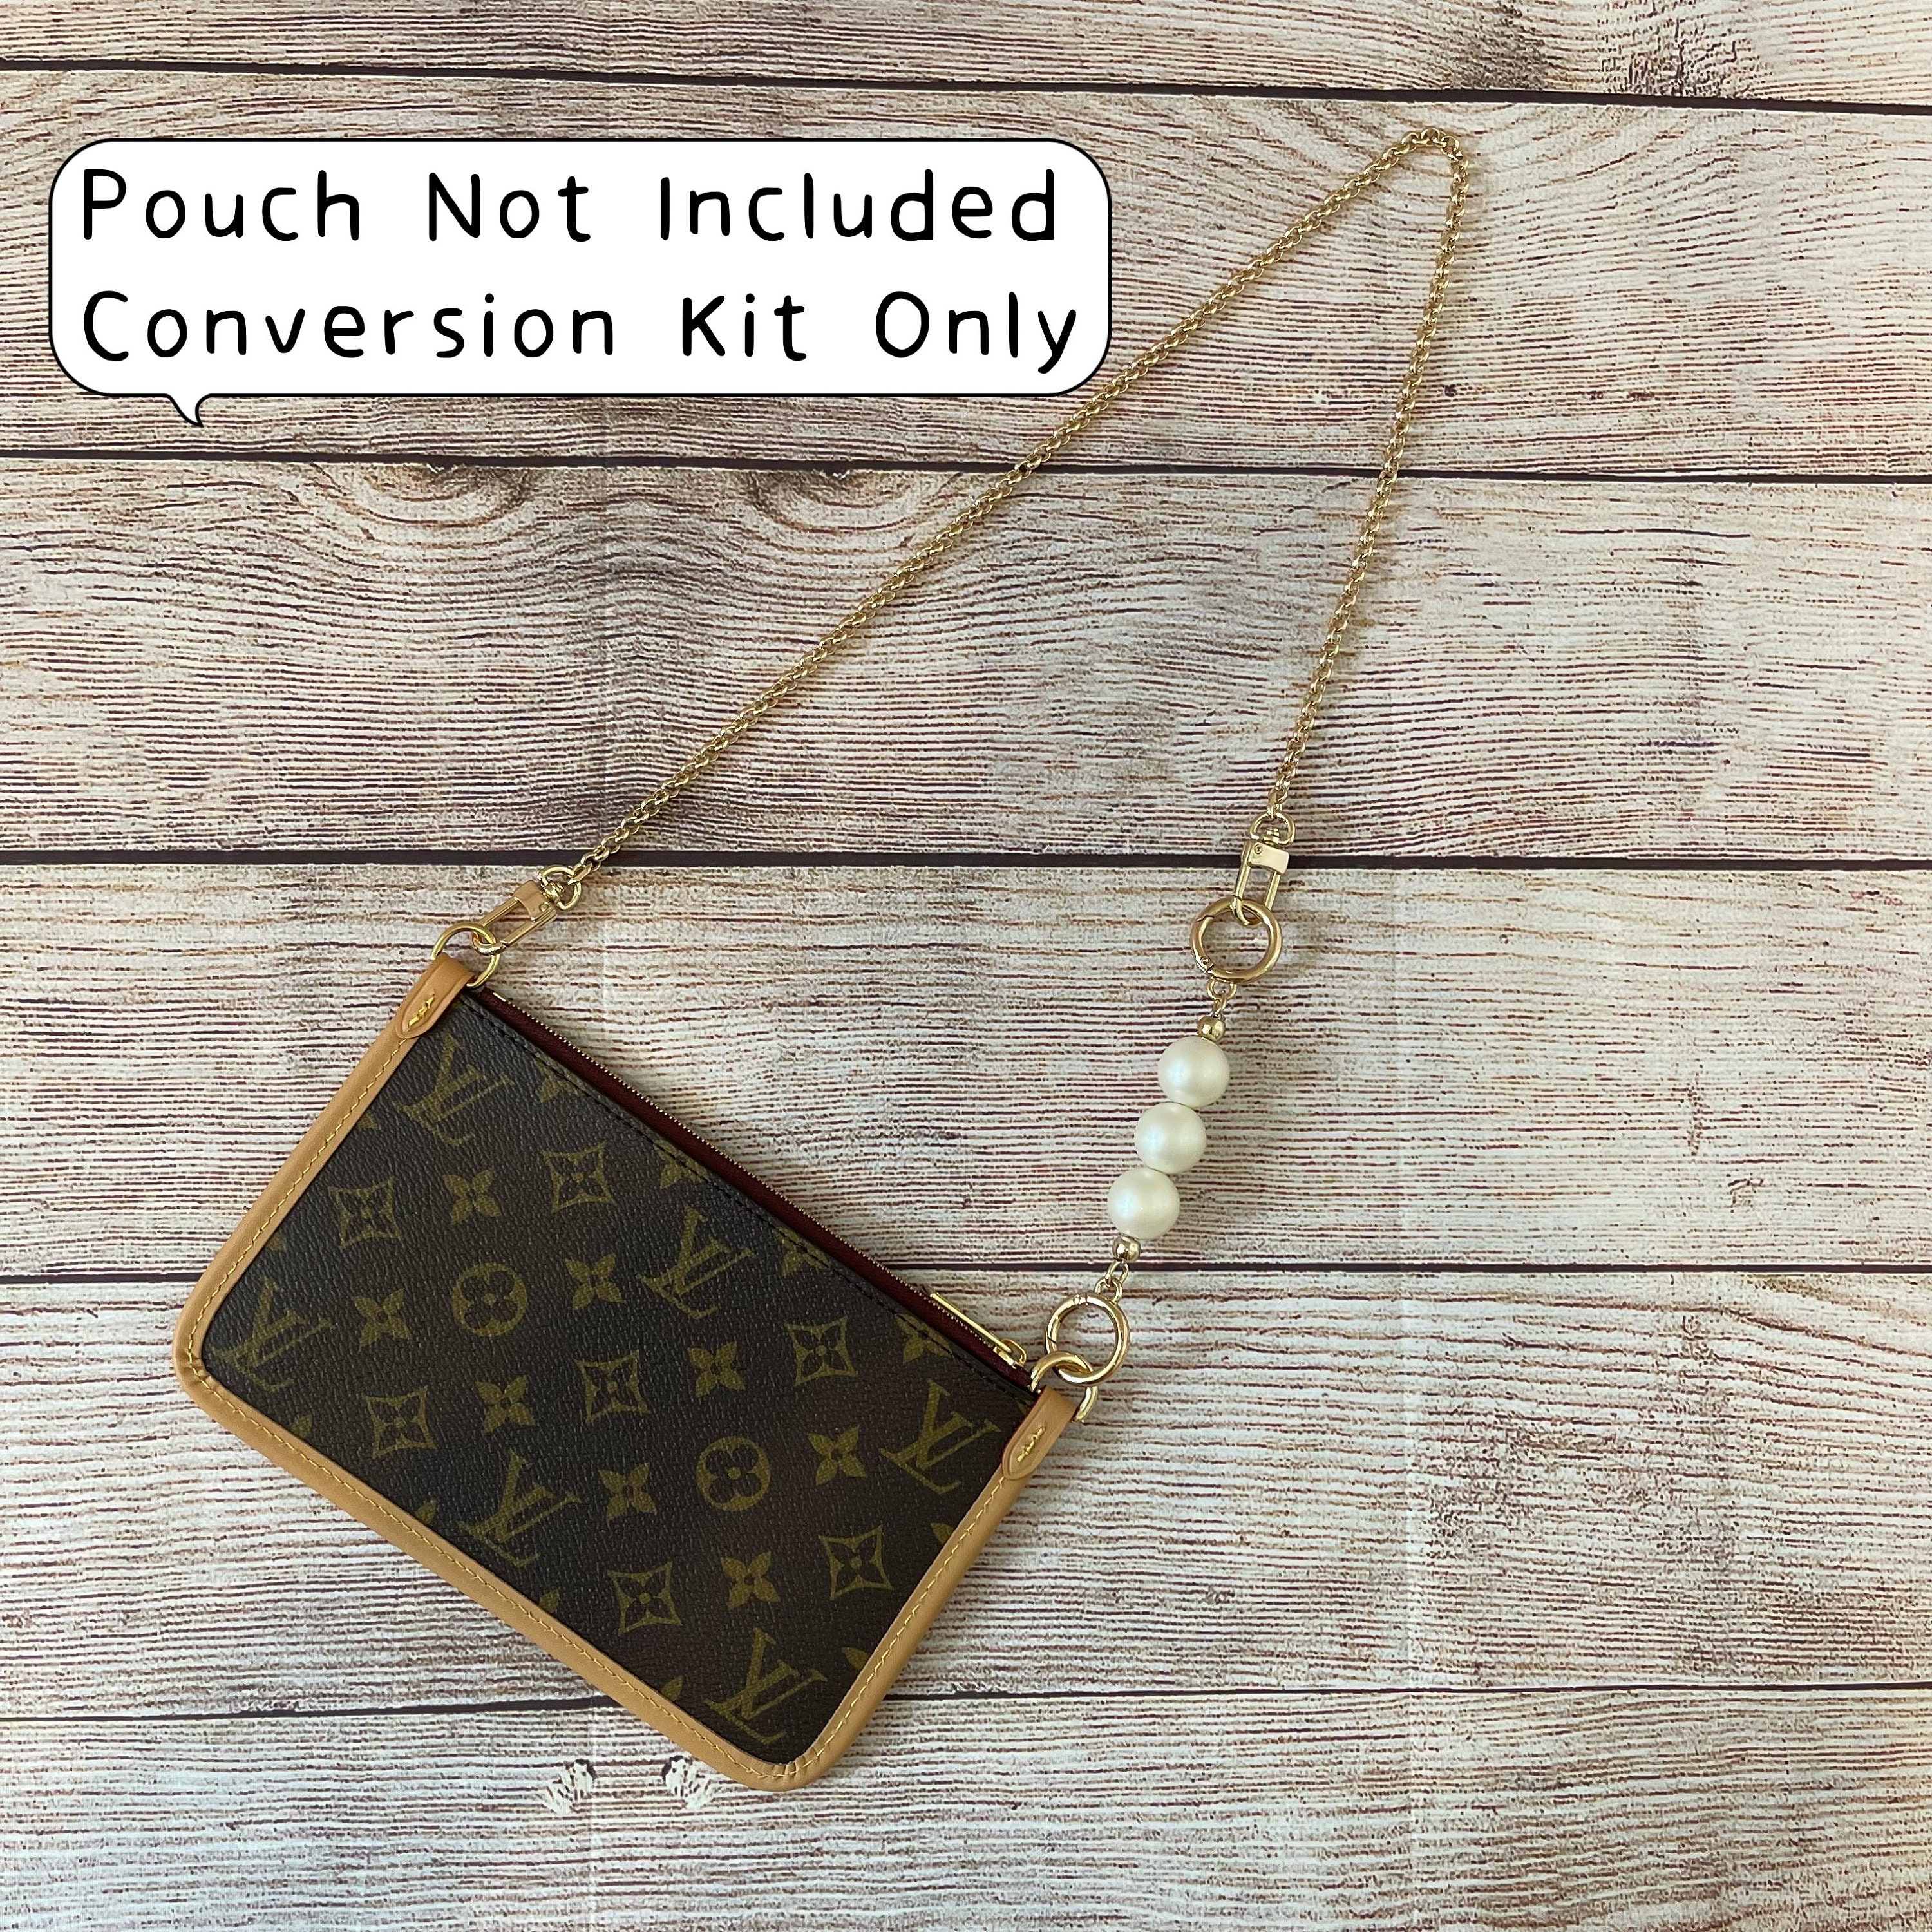 SHOP for the LOOK 7 Conversion Kit for Carryall PM 